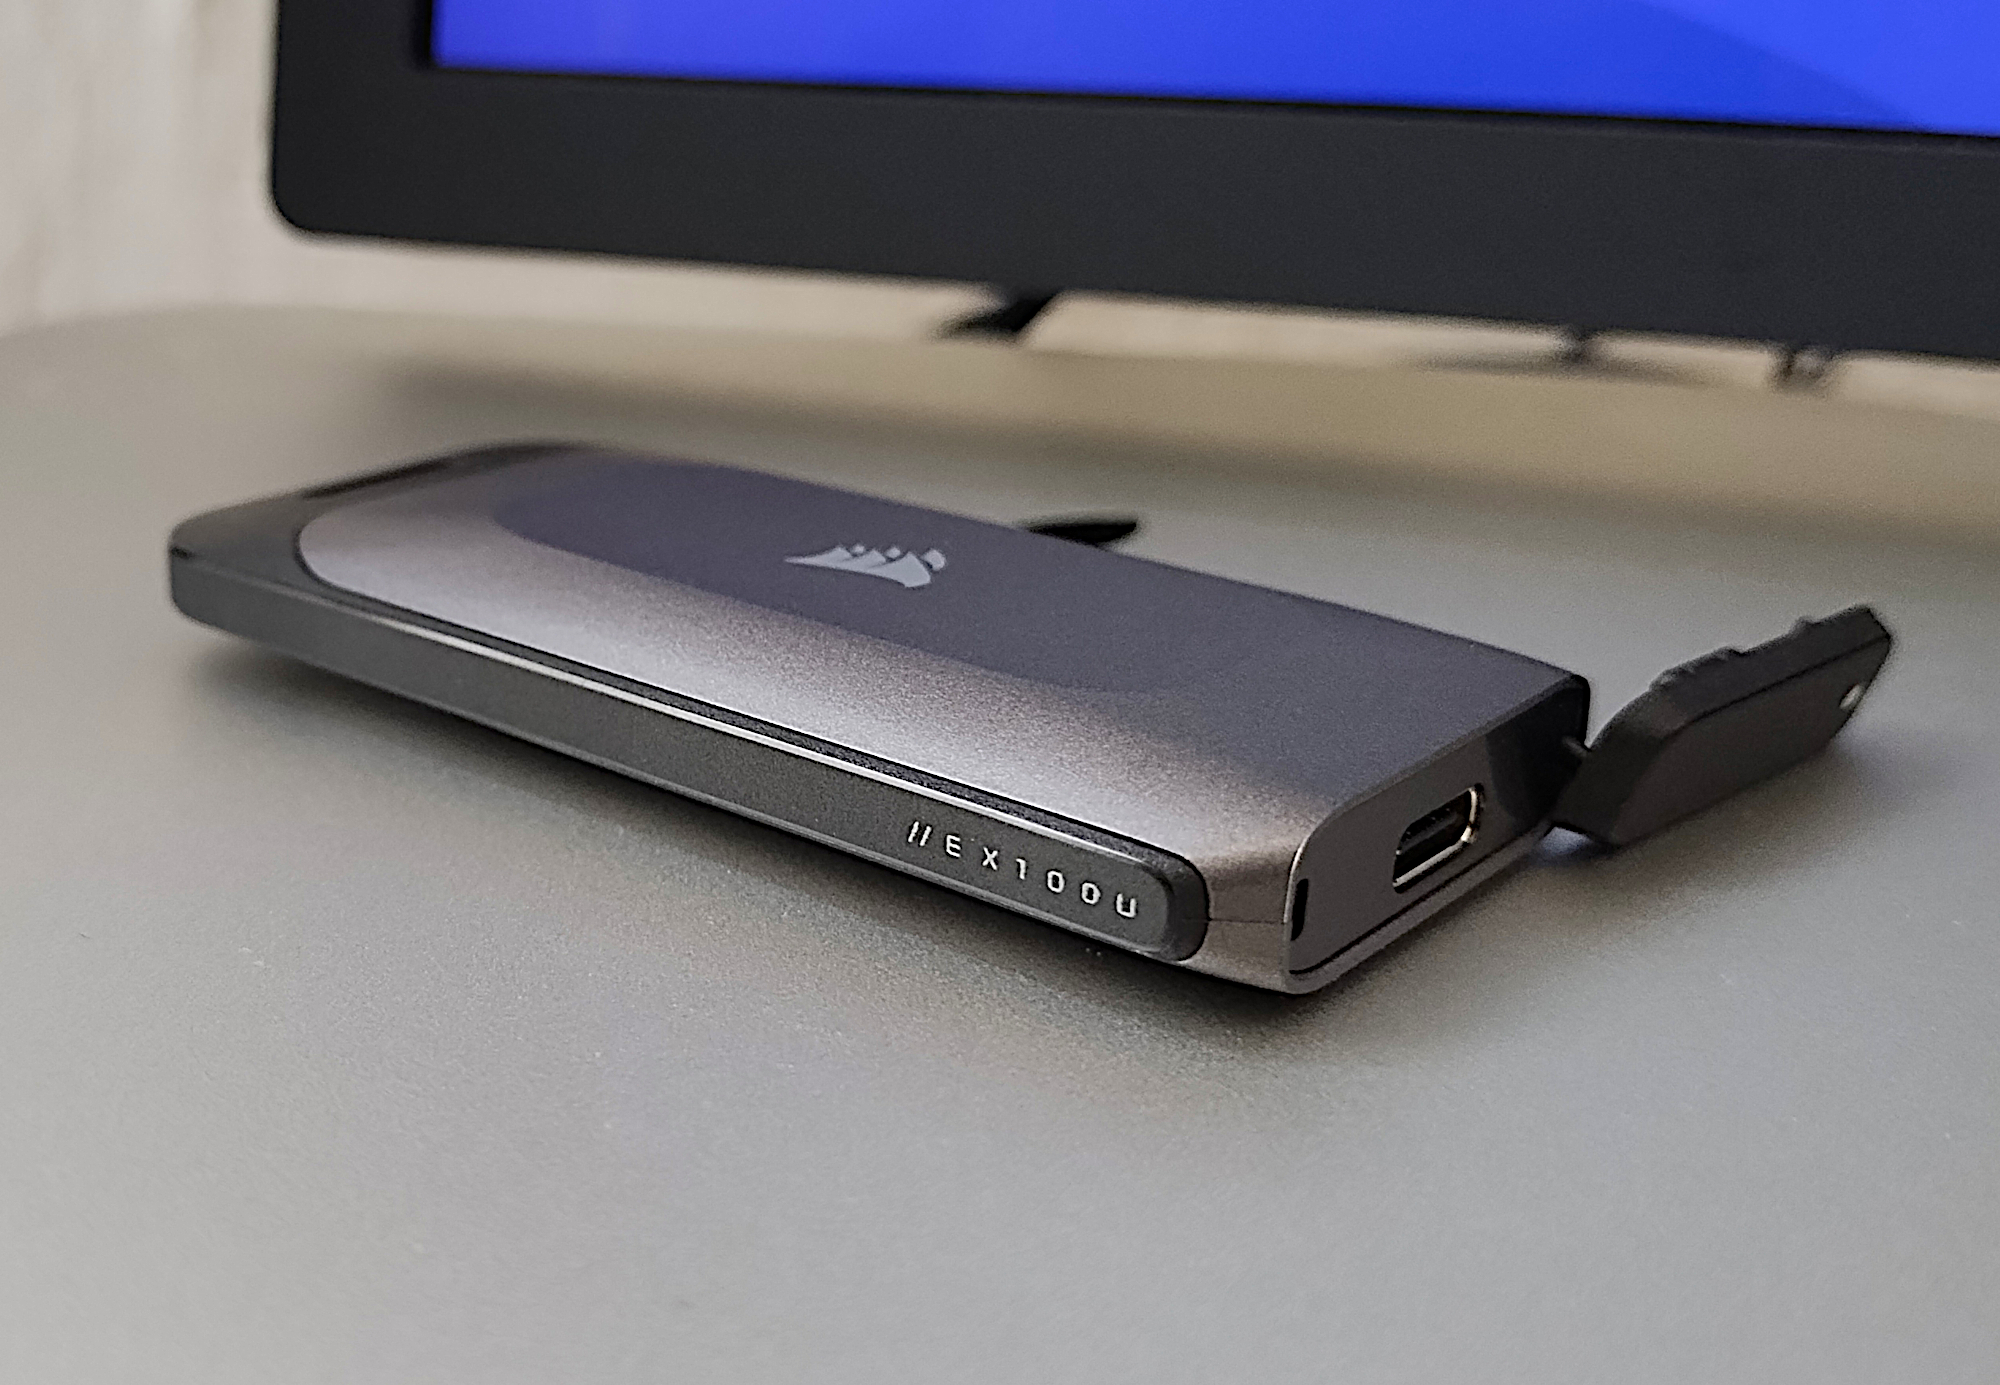 Corsair EX100U transportable SSD evaluate: Lags unhurried the competition